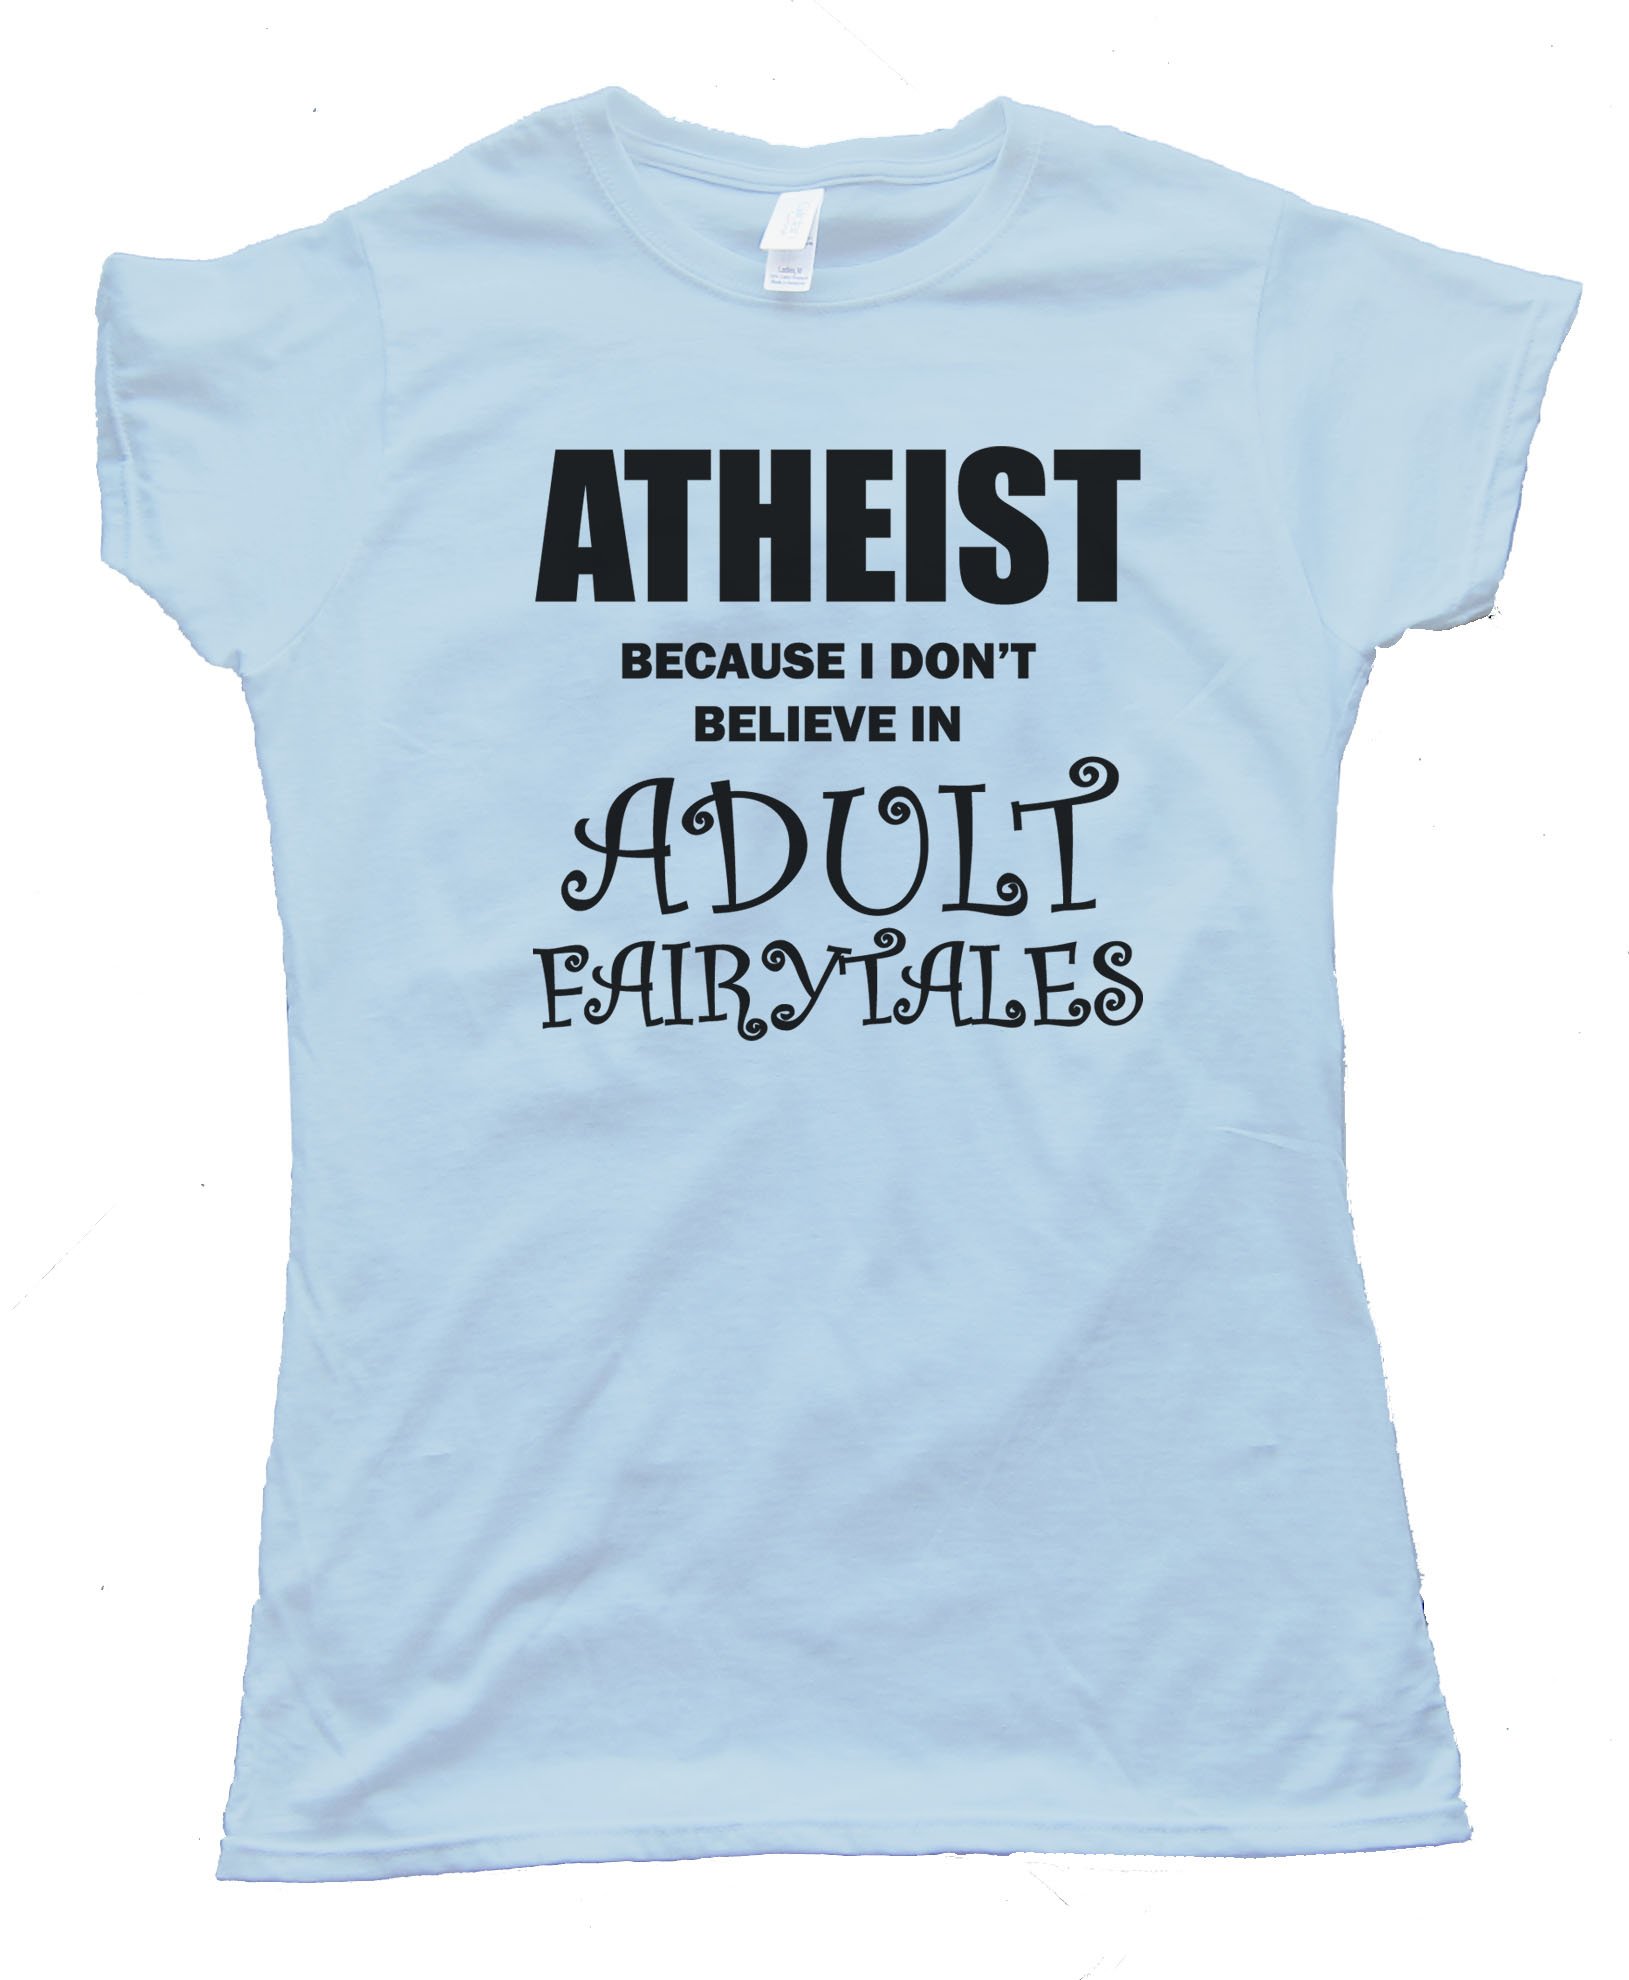 Womens Athiest - Because I Don'T Believe In Adult Fairytails Tee Shirt